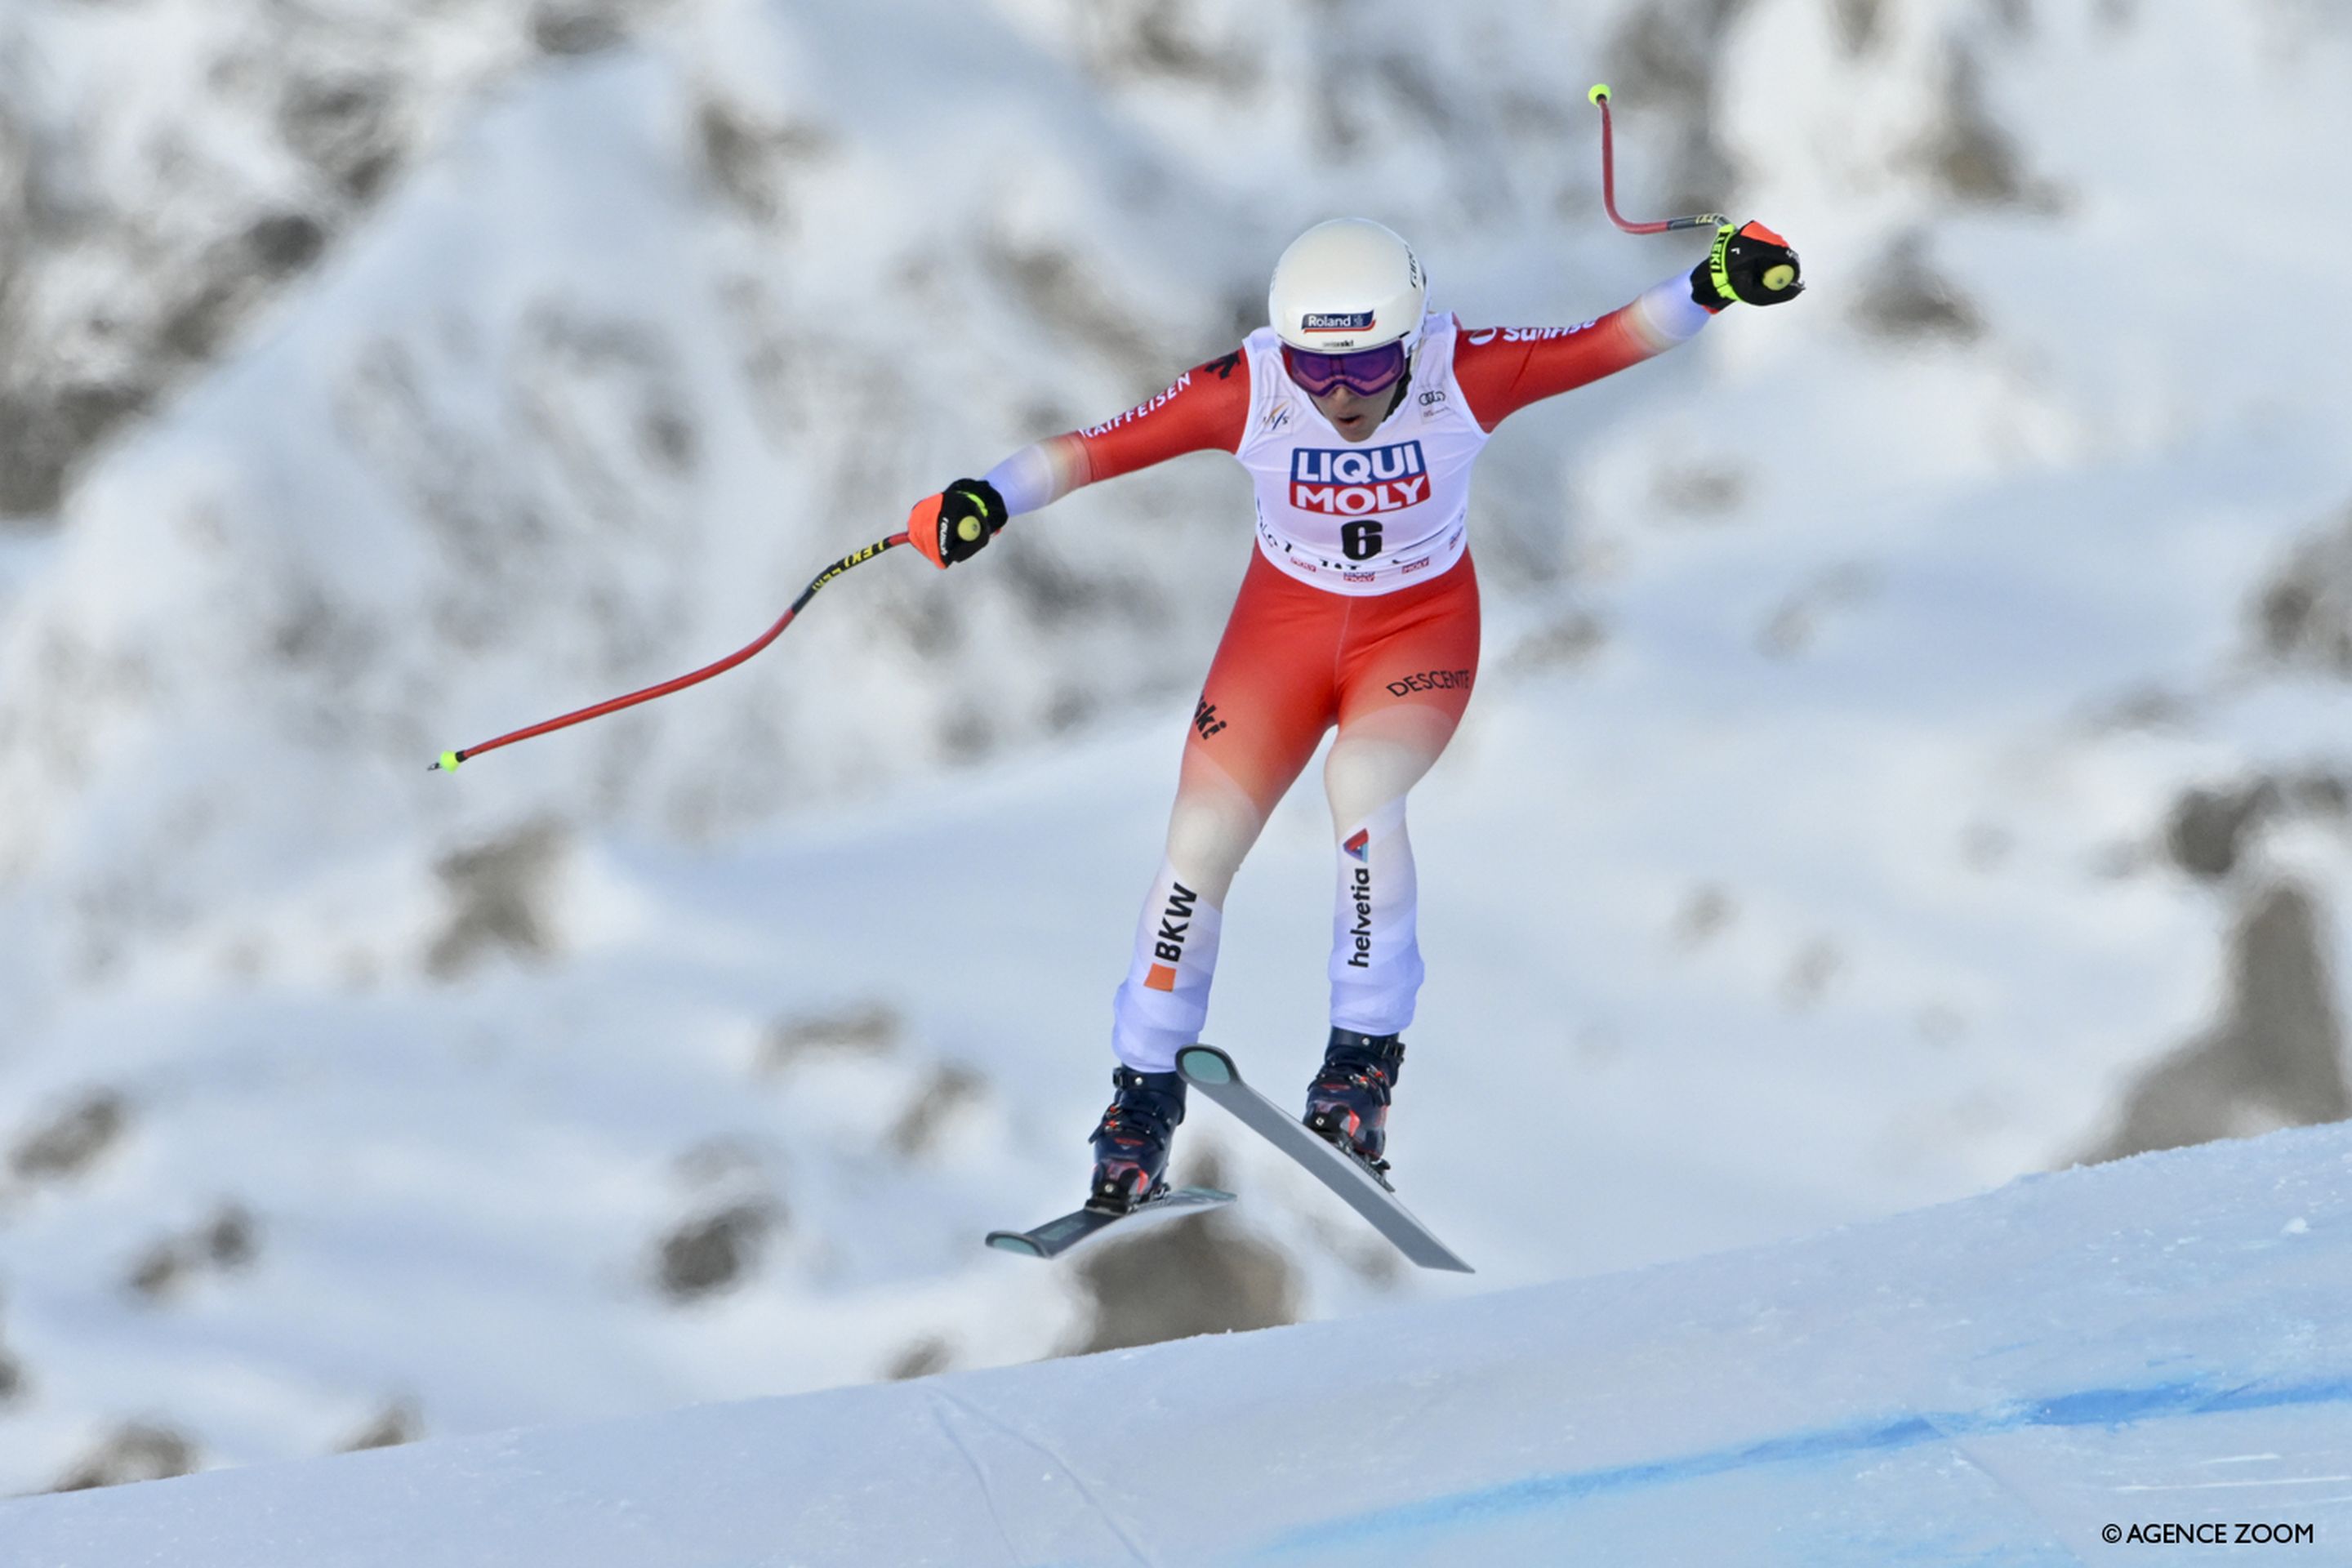 Jasmine Flury on her way to her first World Cup downhill win (Agence Zoom)